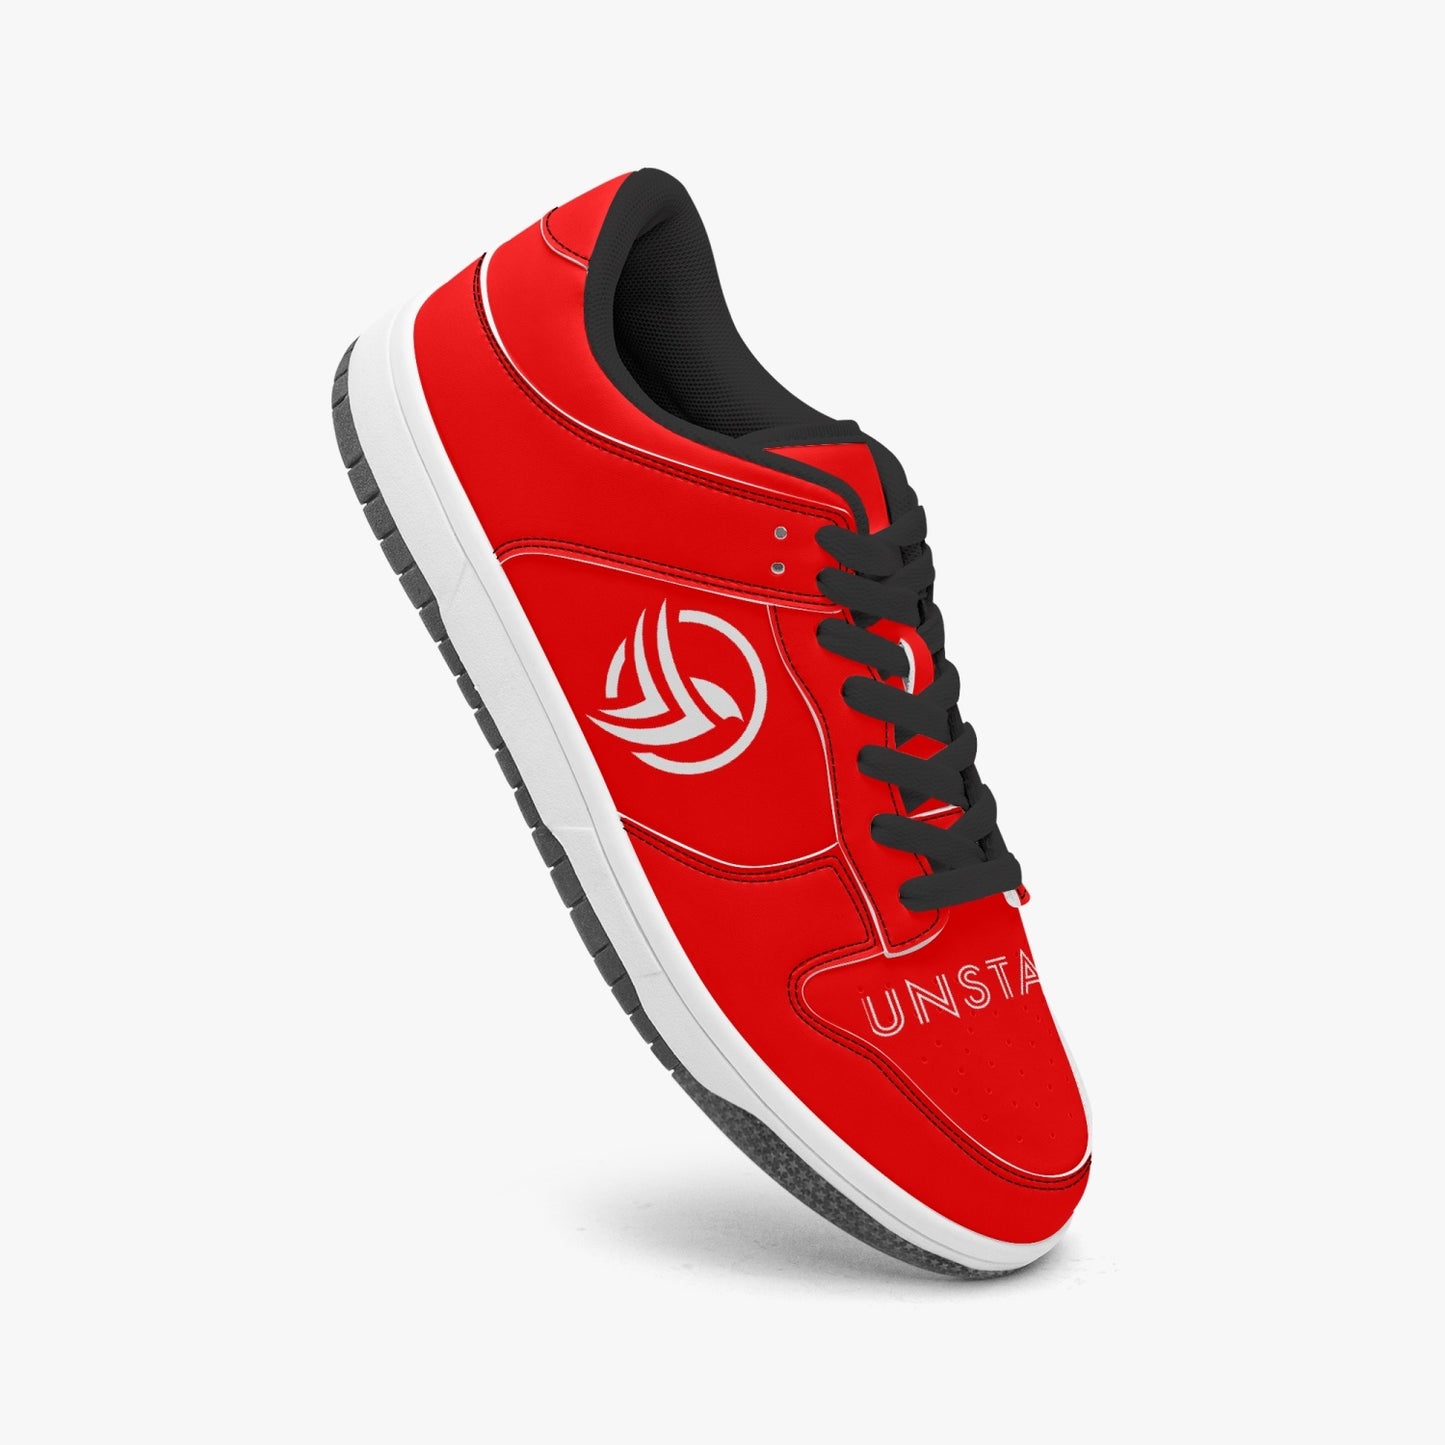 Unstax Red Dunk Stylish Low-Top Leather Sneakers